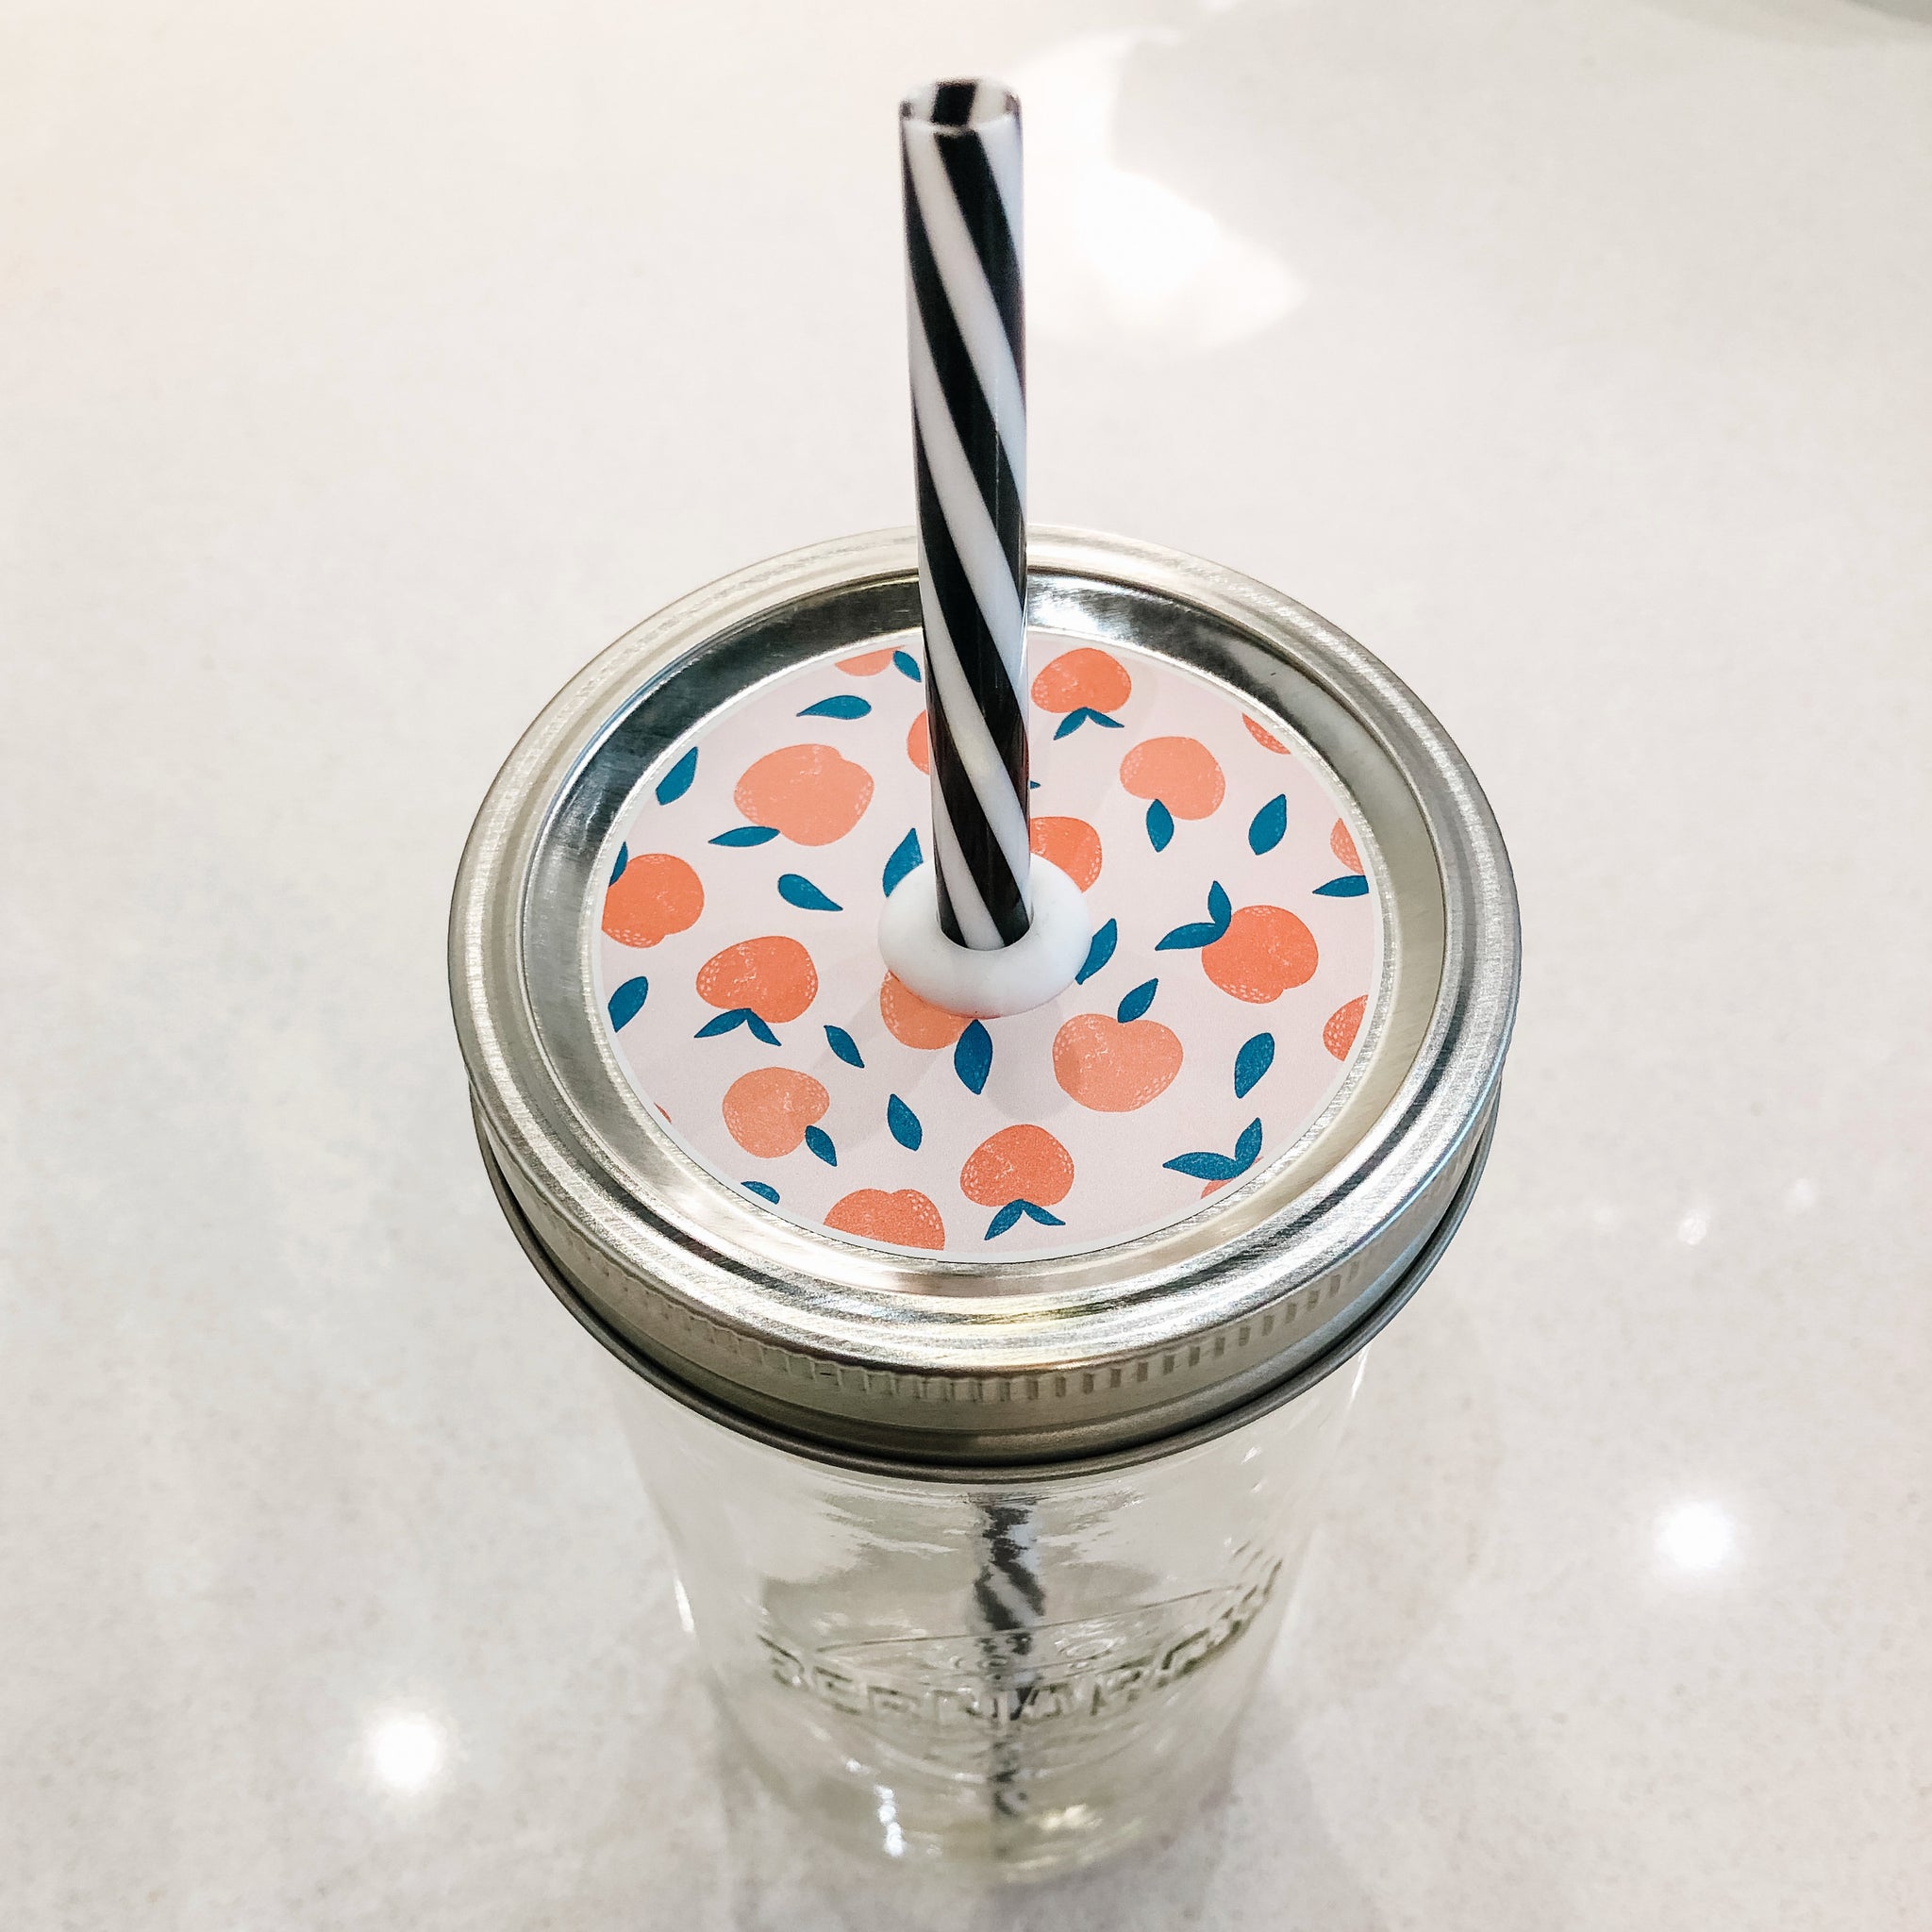 True - Sippy Stainless Steel Straws